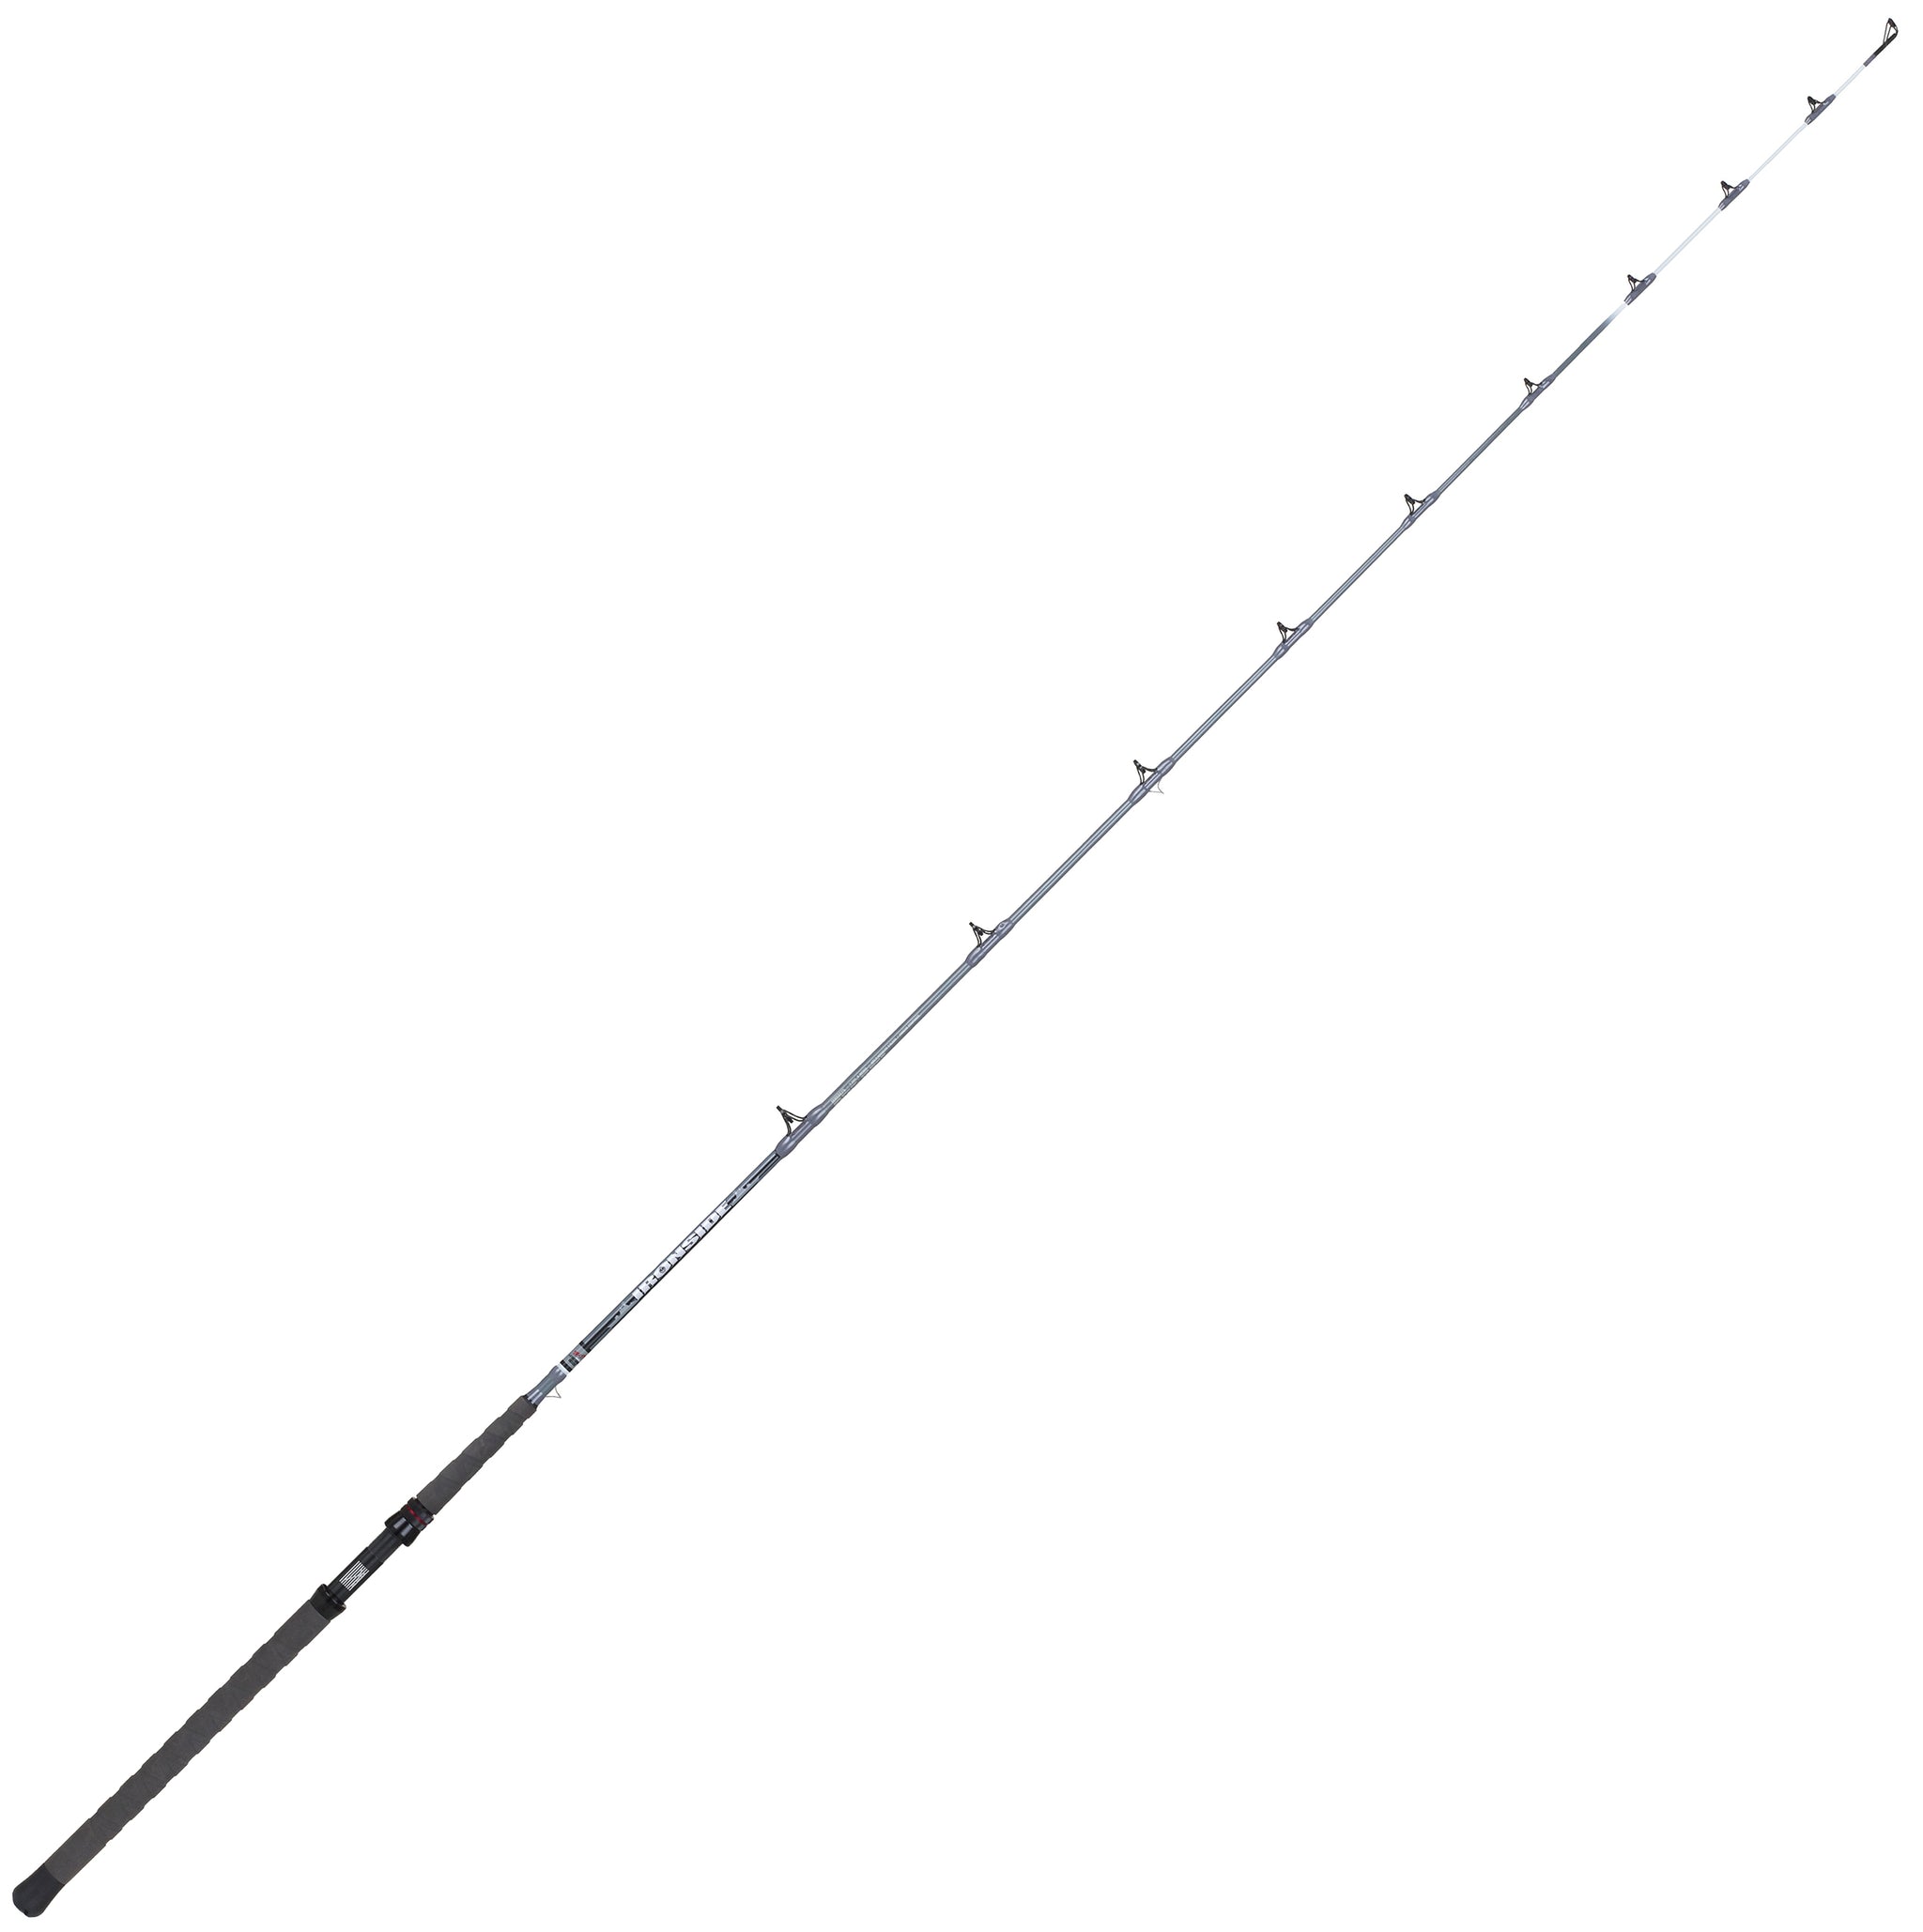 BnM The Stick 13 ft 2 pc Heavy Action Jig fishing Pole $110